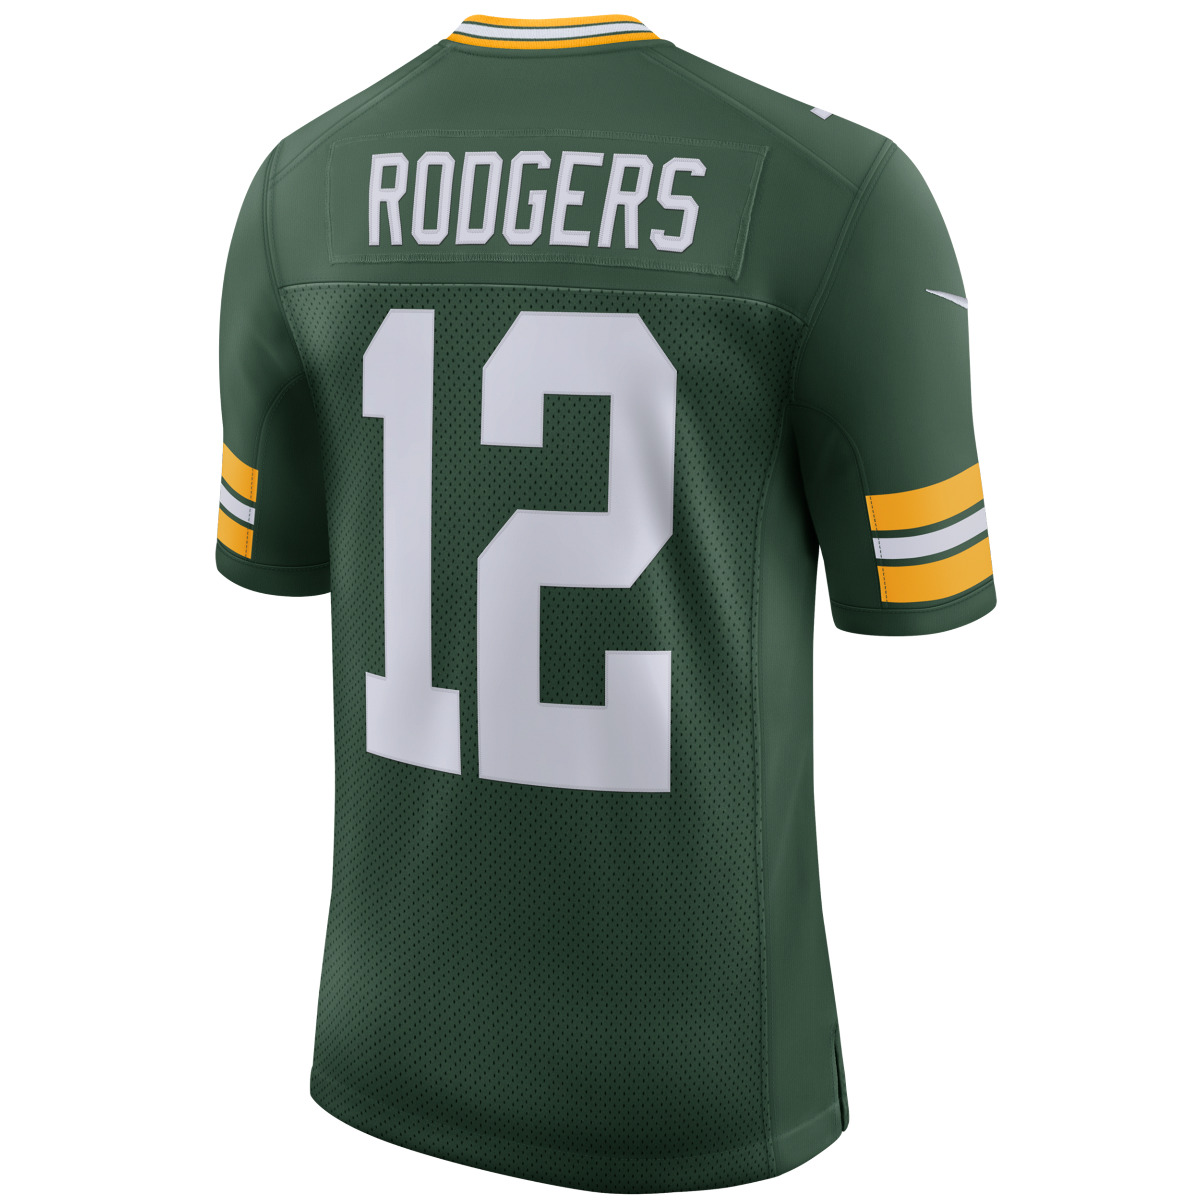 #12 Aaron Rodgers Home Limited Jersey